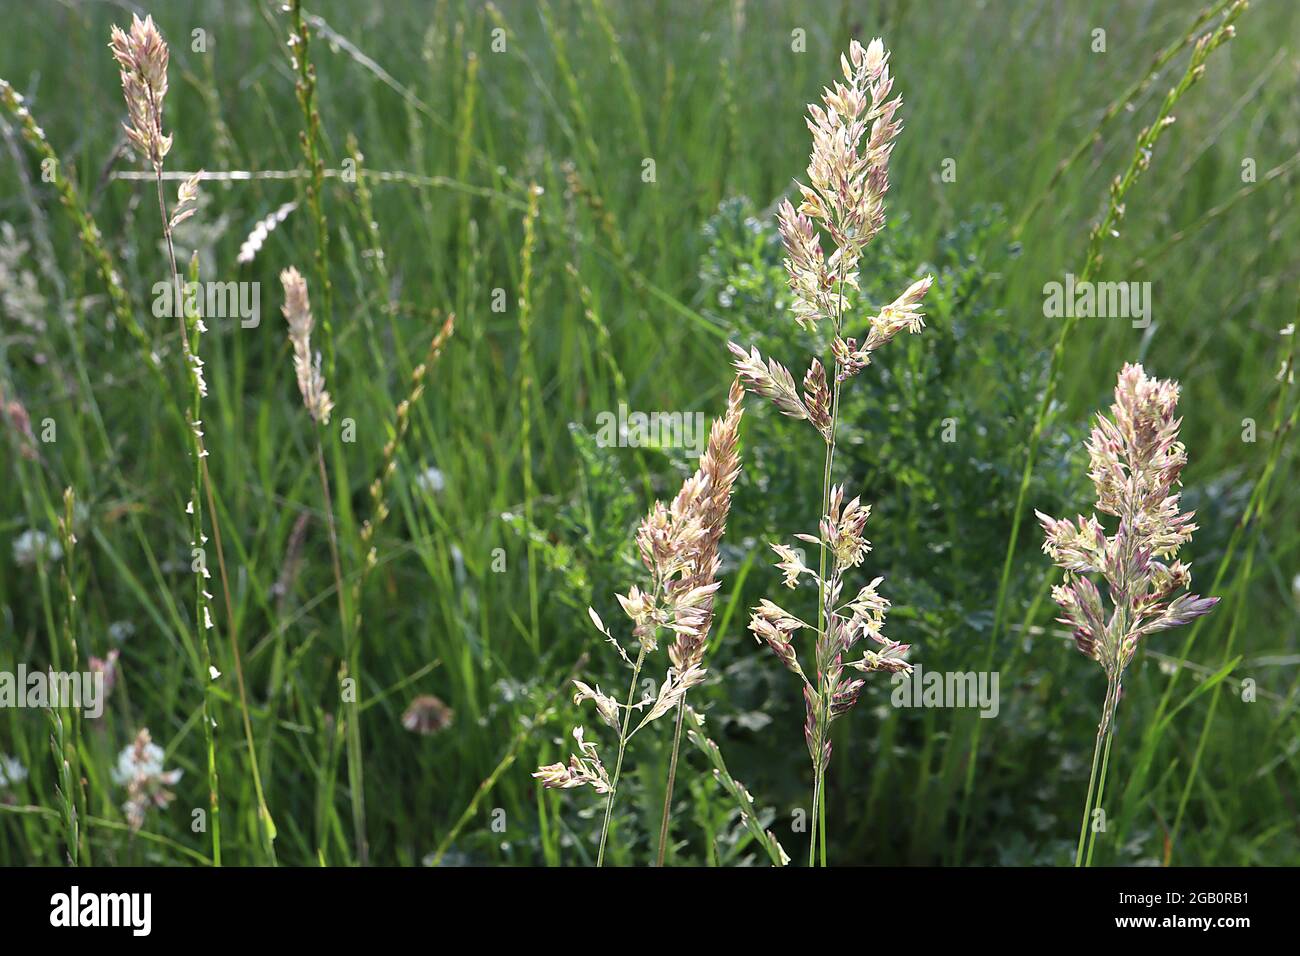 Poa pratensis smooth stalked meadow grass – feathery plumes of purple tipped flowers on smooth stems,  June, England, UK Stock Photo